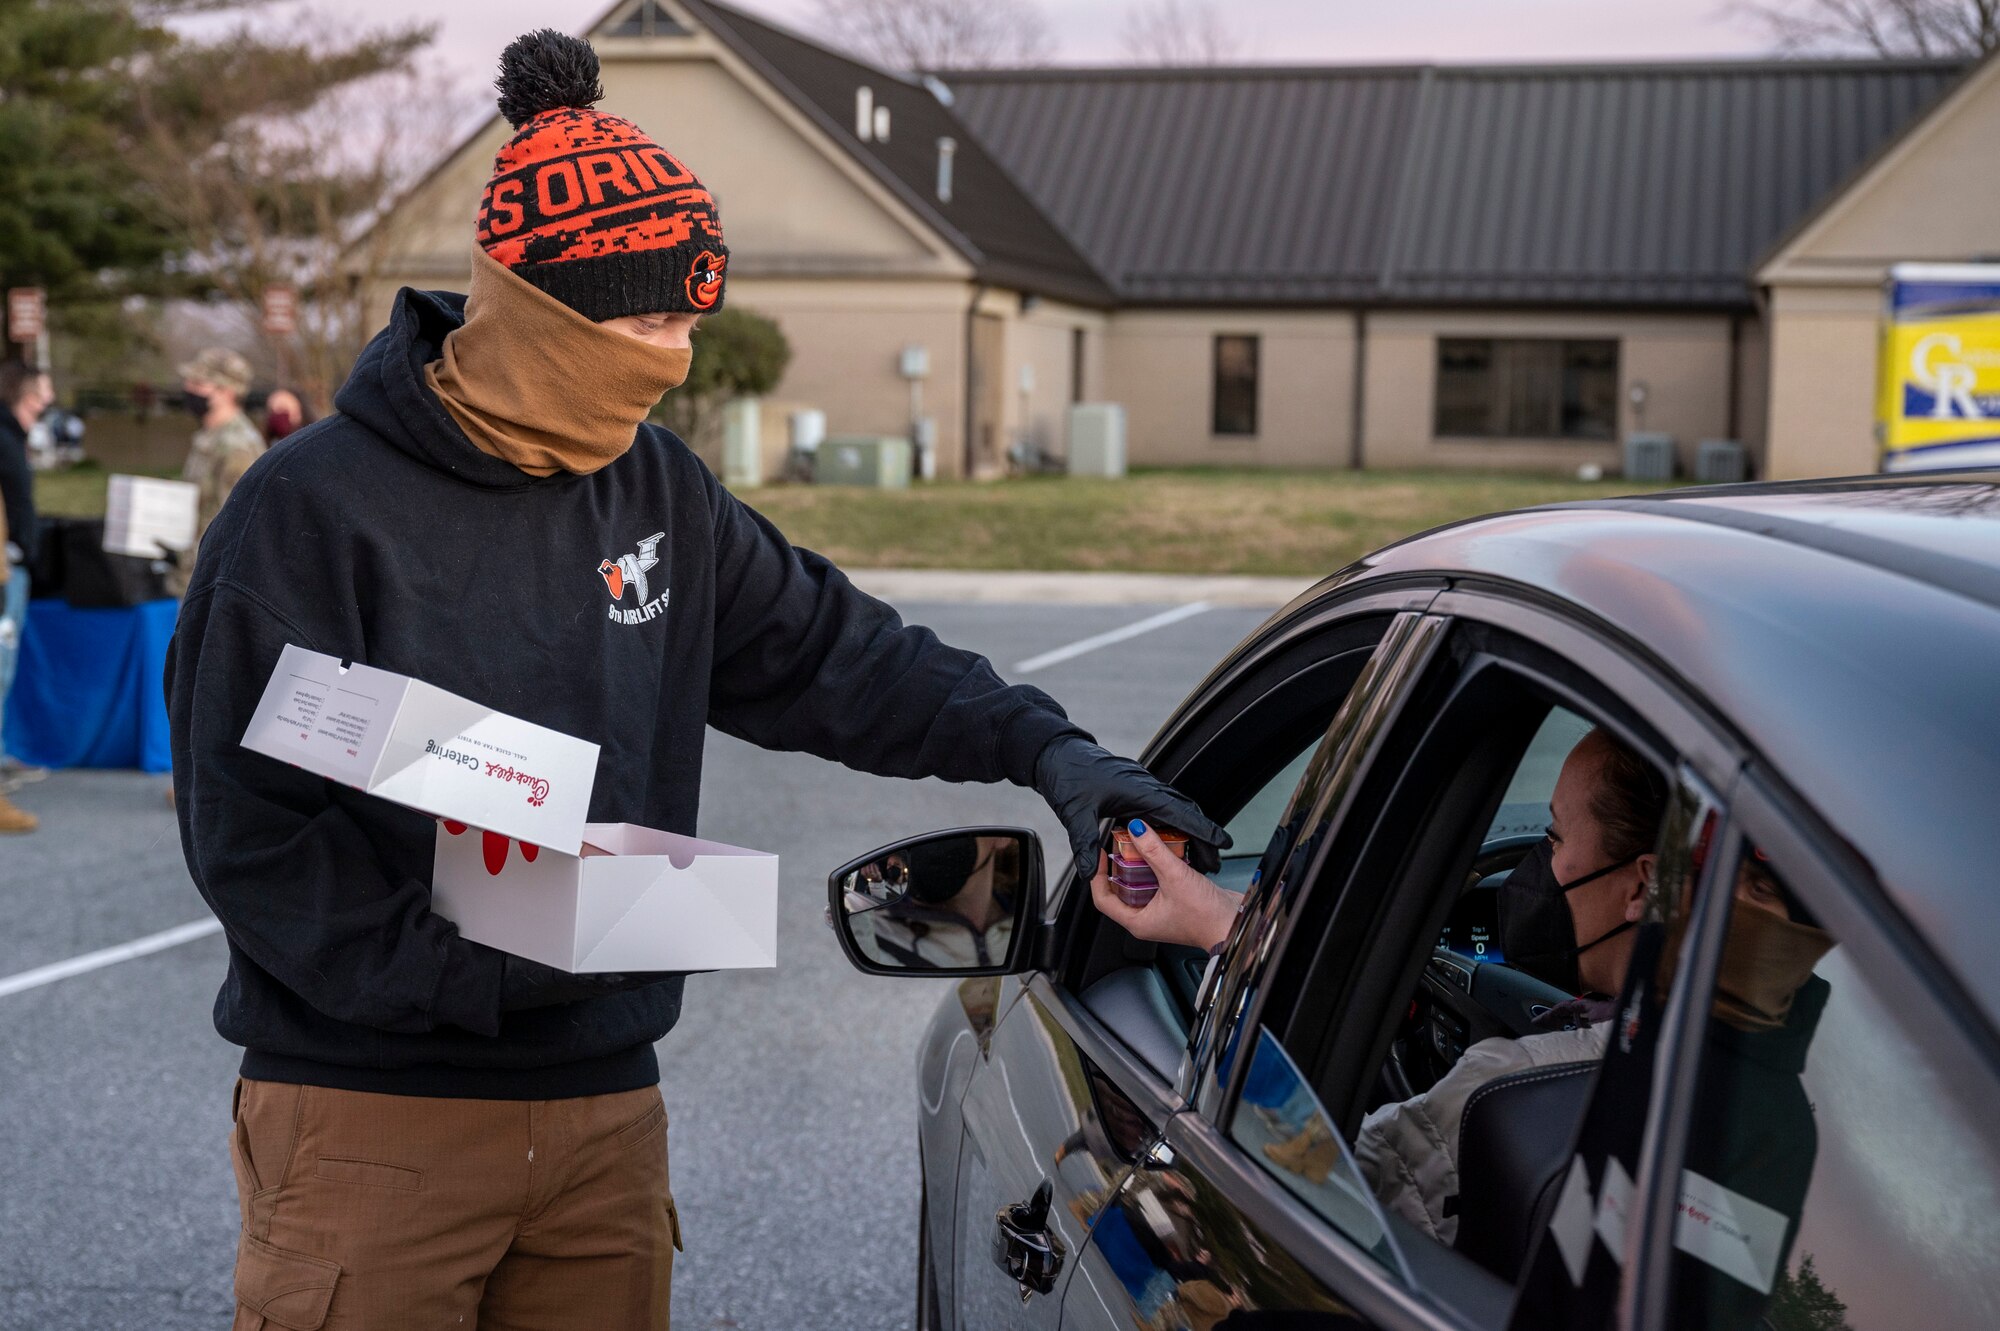 Staff Sgt. Justin Thomas, 9th Airlift Squadron loadmaster, hands out sauce packets at a deployed spouses drive-thru dinner event Jan. 21, 2021, at Dover Air Force Base, Delaware. The event provided meals, gift bags and toys to families of deployed service members in recognition of their sacrifice. The deployed spouses dinner is one of many ways Team Dover takes care of service members and their loved ones. (U.S. Air Force photo by Airman 1st Class Cydney Lee)